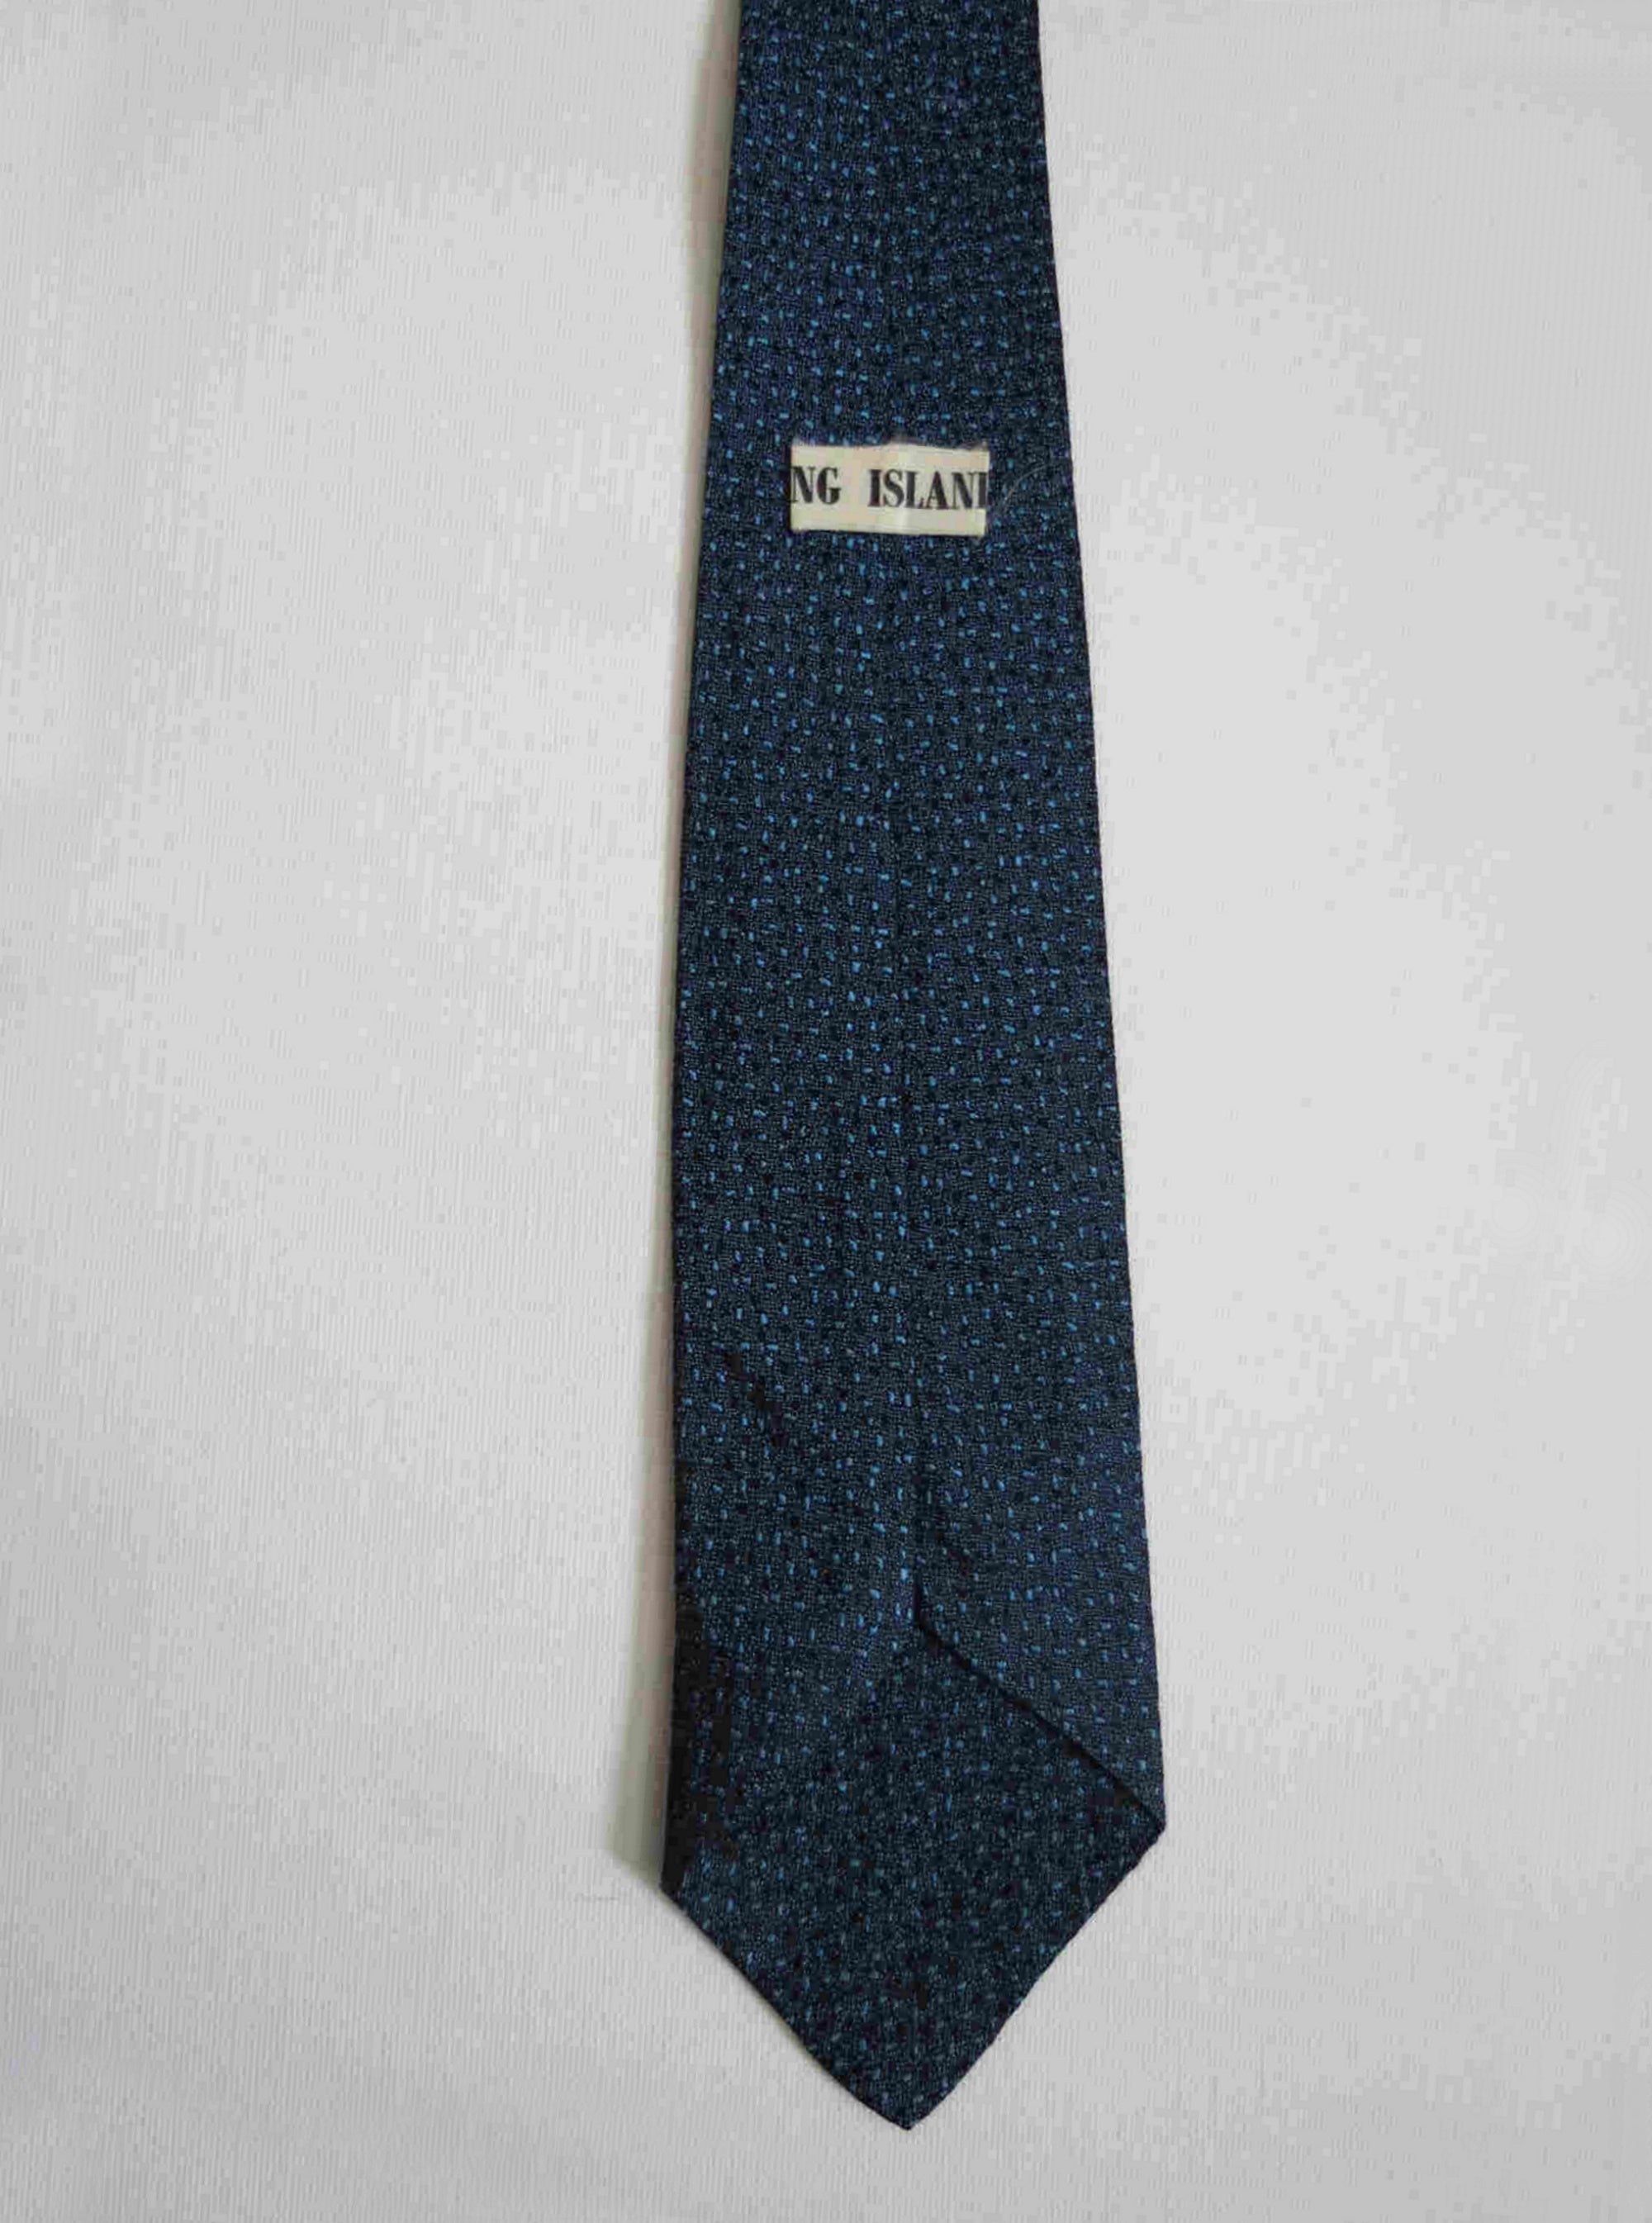 1960s vintage blue rayon tie by long island